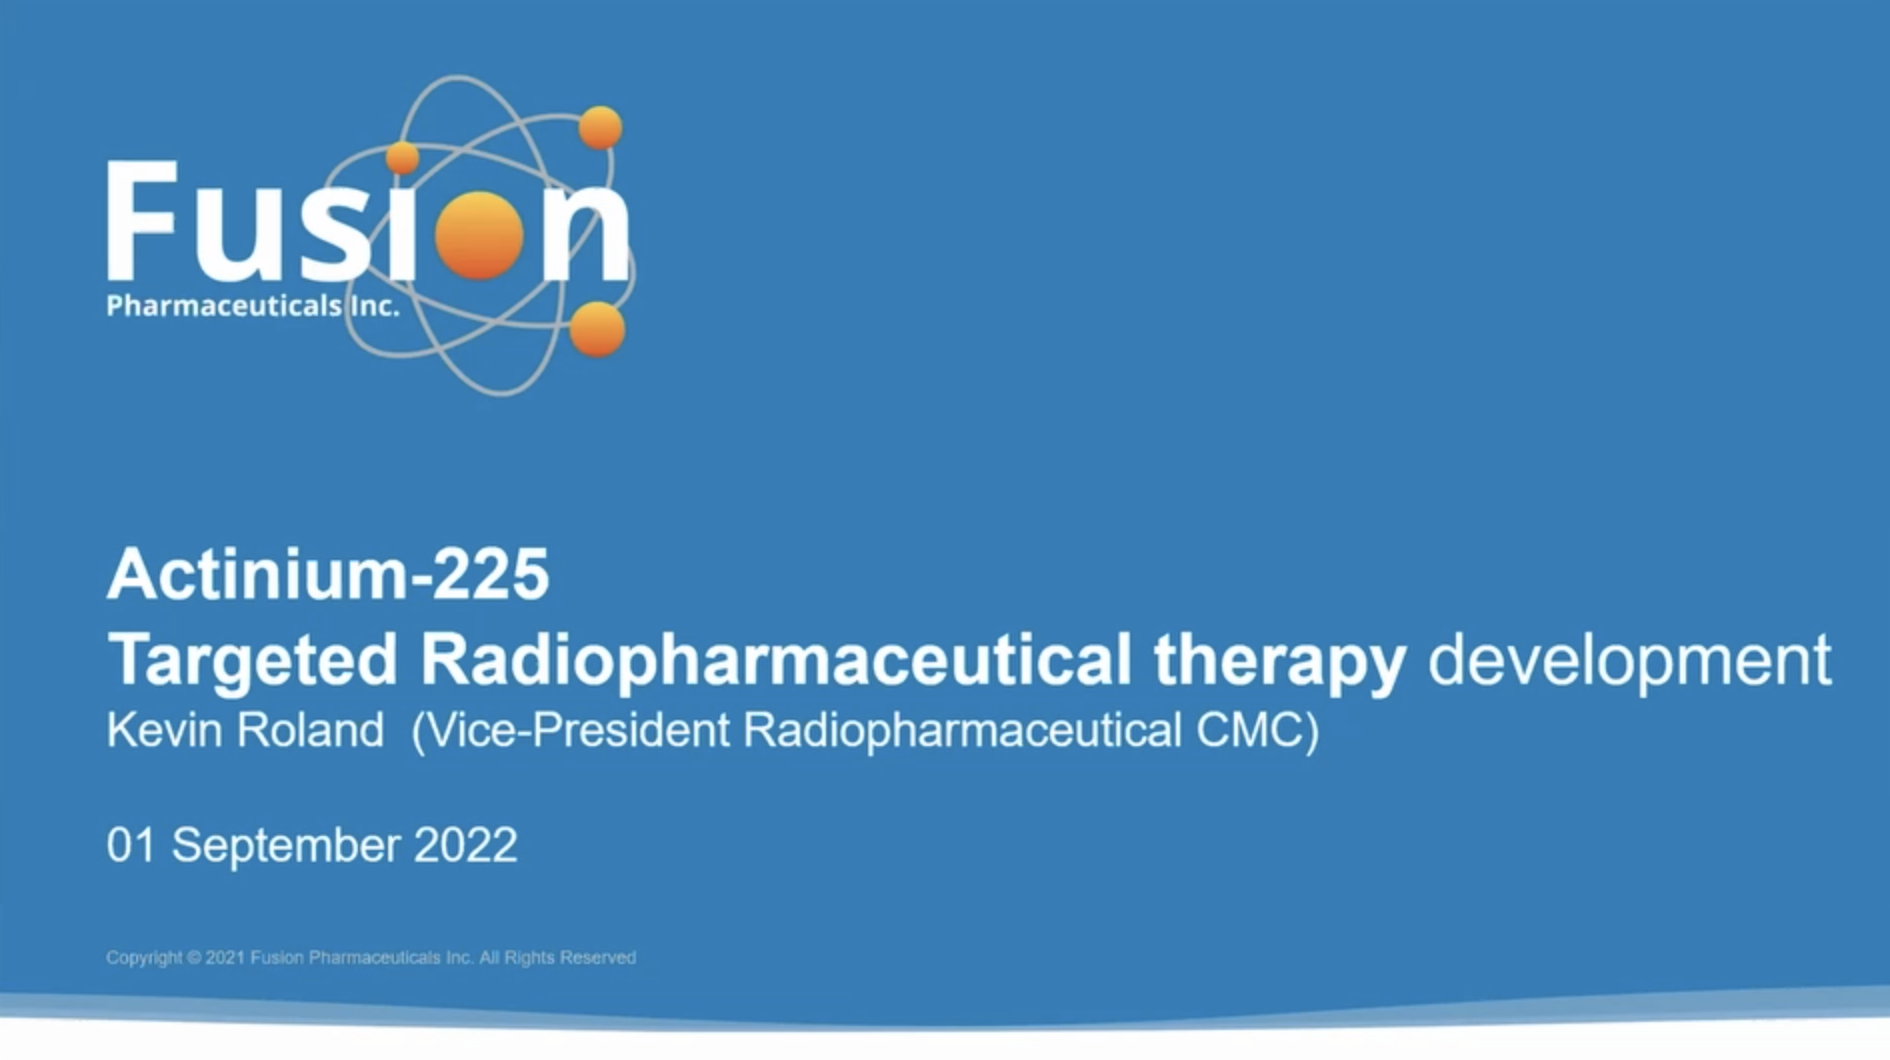 Actinium-225 Targeted Radiopharmaceutical Therapy Development by Kevin Roland, Fusion Pharmaceuticals Inc. 